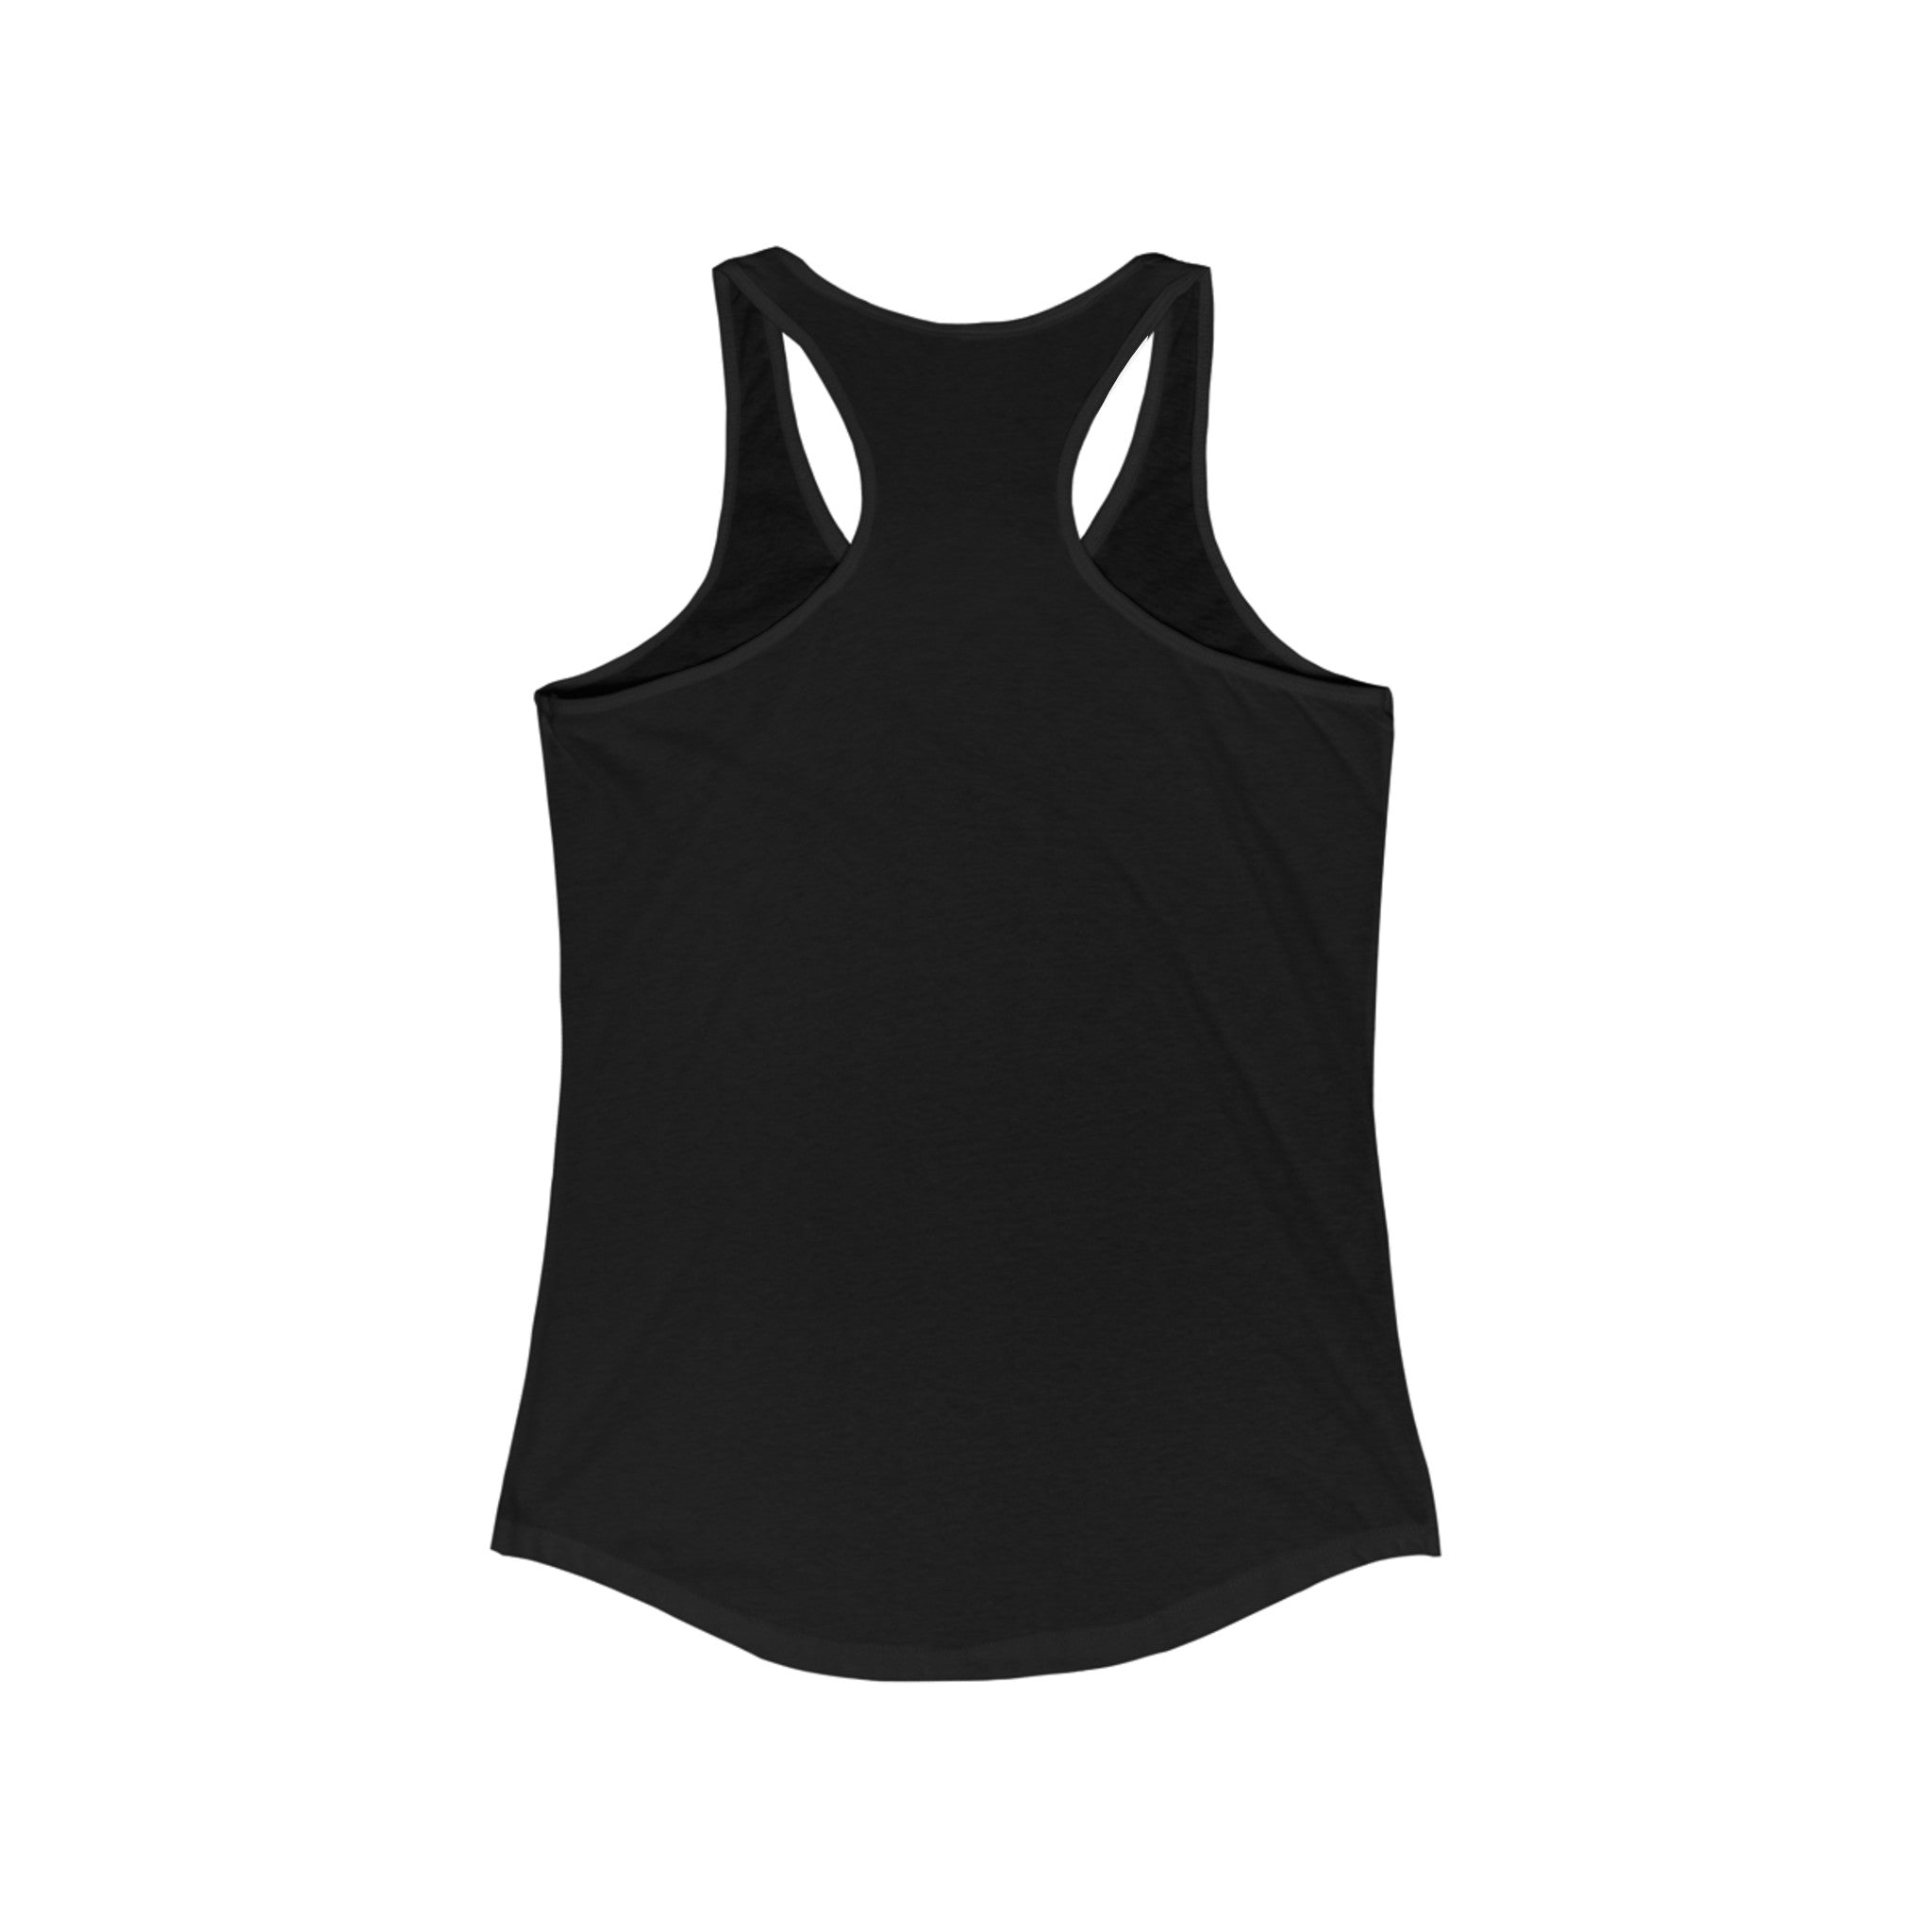 Error 404: Motivation not found - Women's Racerback Tank in black, shown from the back with a curved hemline, offers remarkable comfort and is delightfully lightweight.